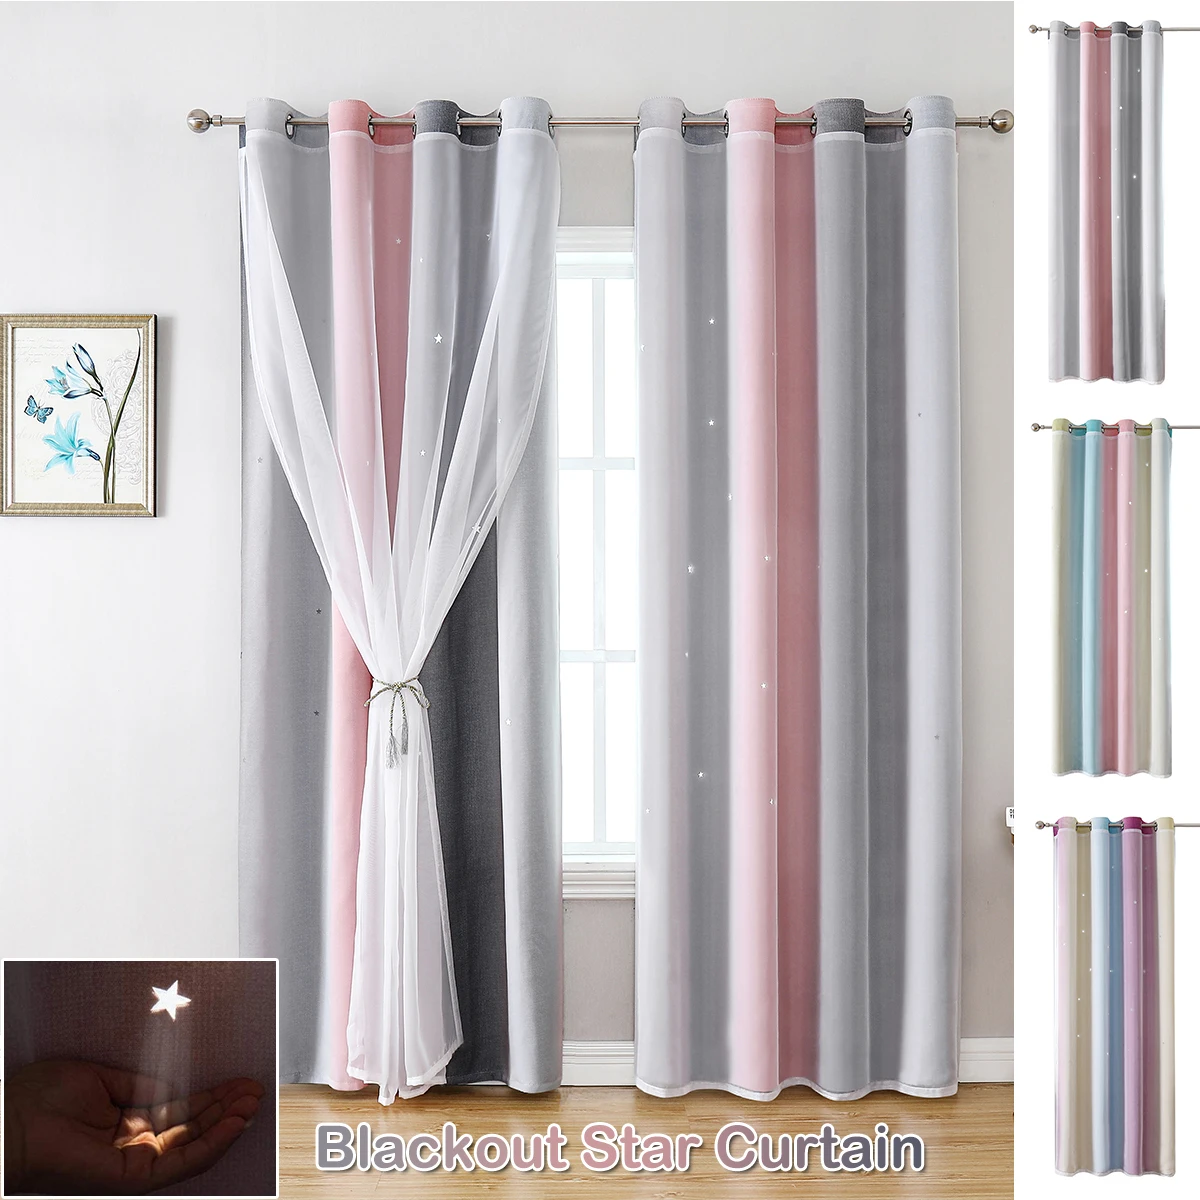 

Shiny Stars Curtains Double-Layer Yarn Tulle Window Curtain For Kids Bedroom Eyelet Drapes Living Room Ombre Blackout Curtain